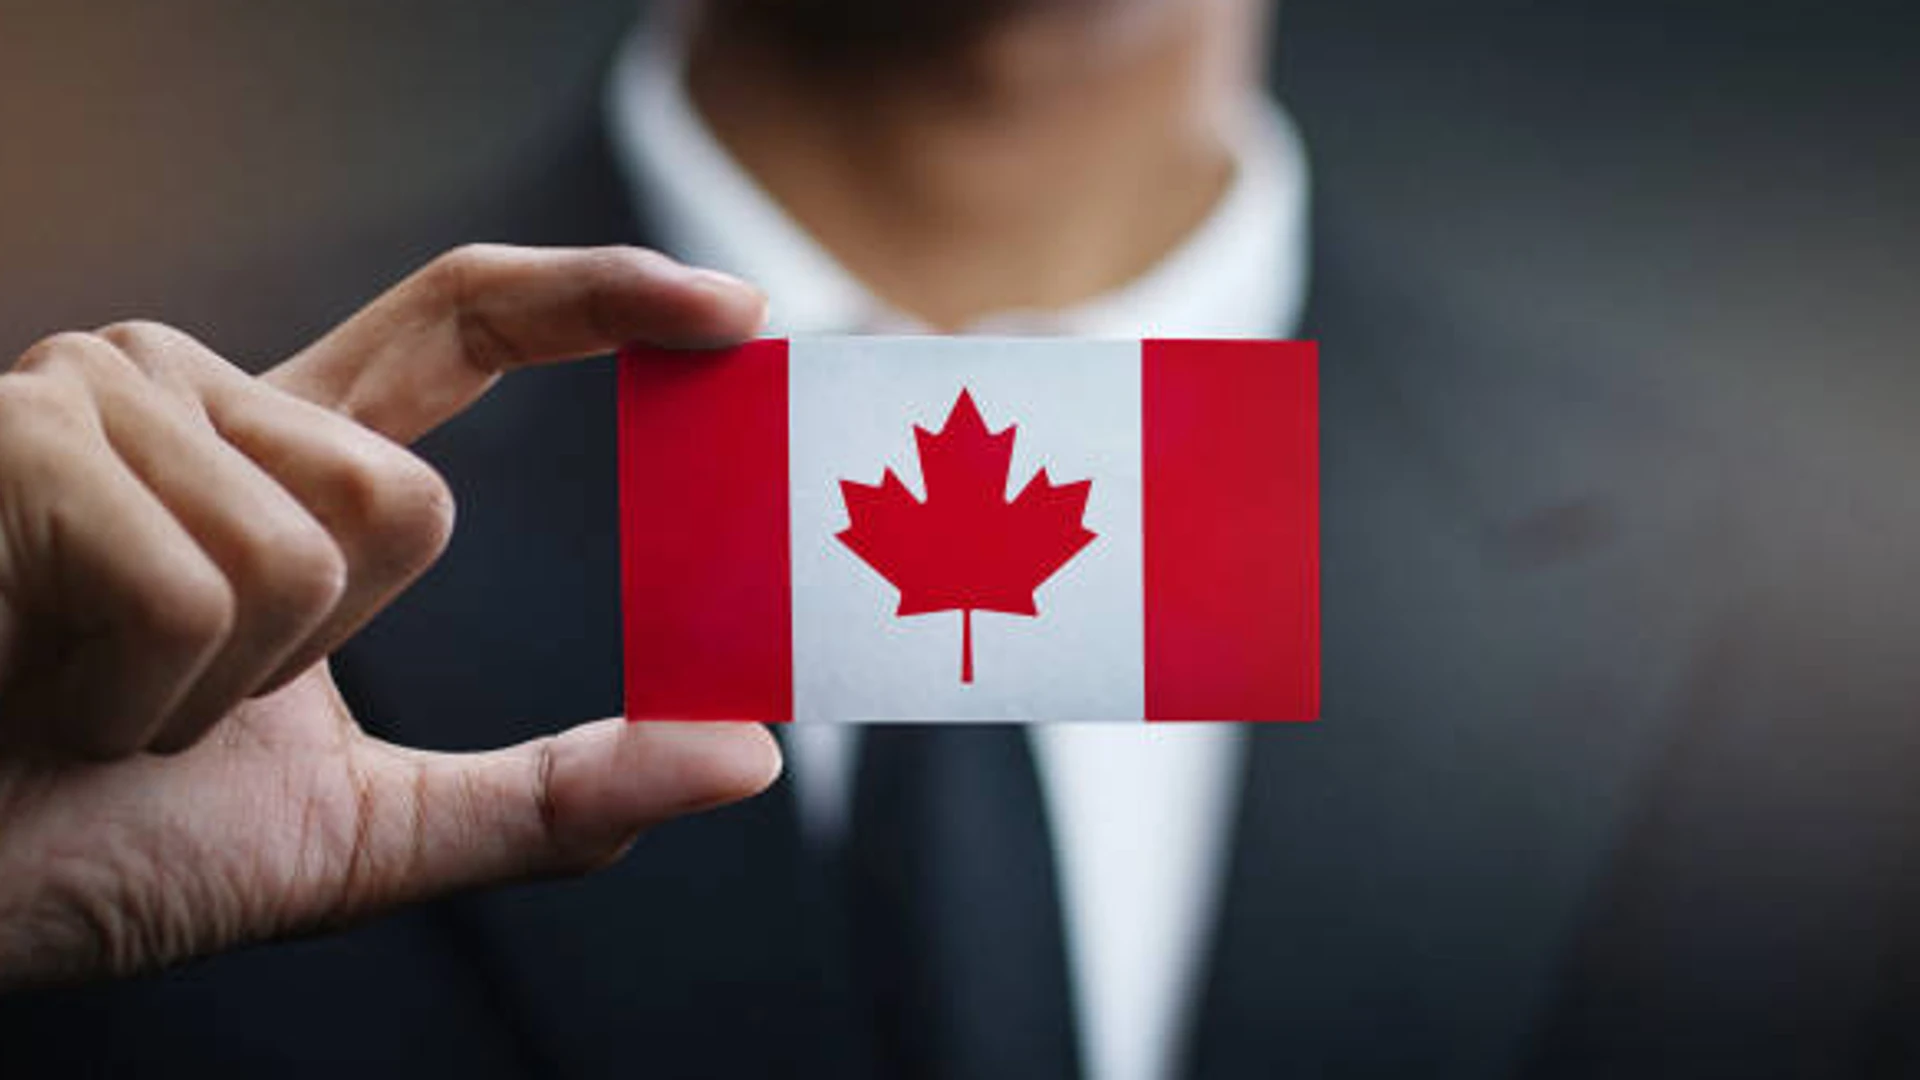 Canada Is Looking For Skilled Foreign Workers For 5 Years! But Only Super Visa Holders Are Eligible